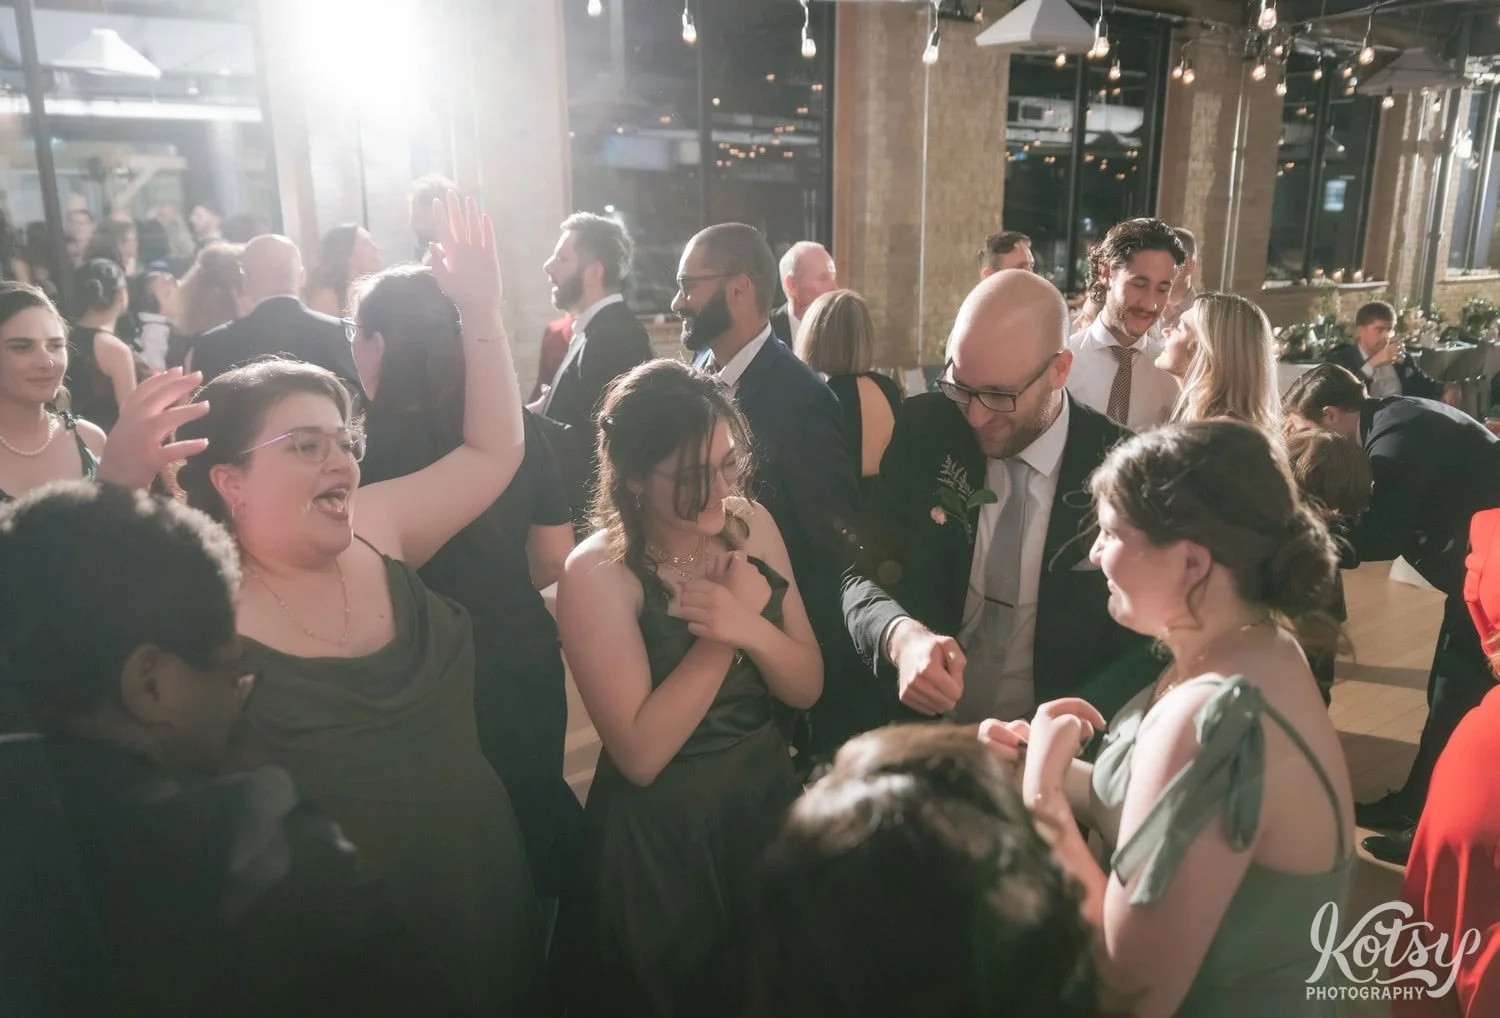 A crowd of people dance excitedly at a Second Floor Events wedding reception in Toronto, Canada.